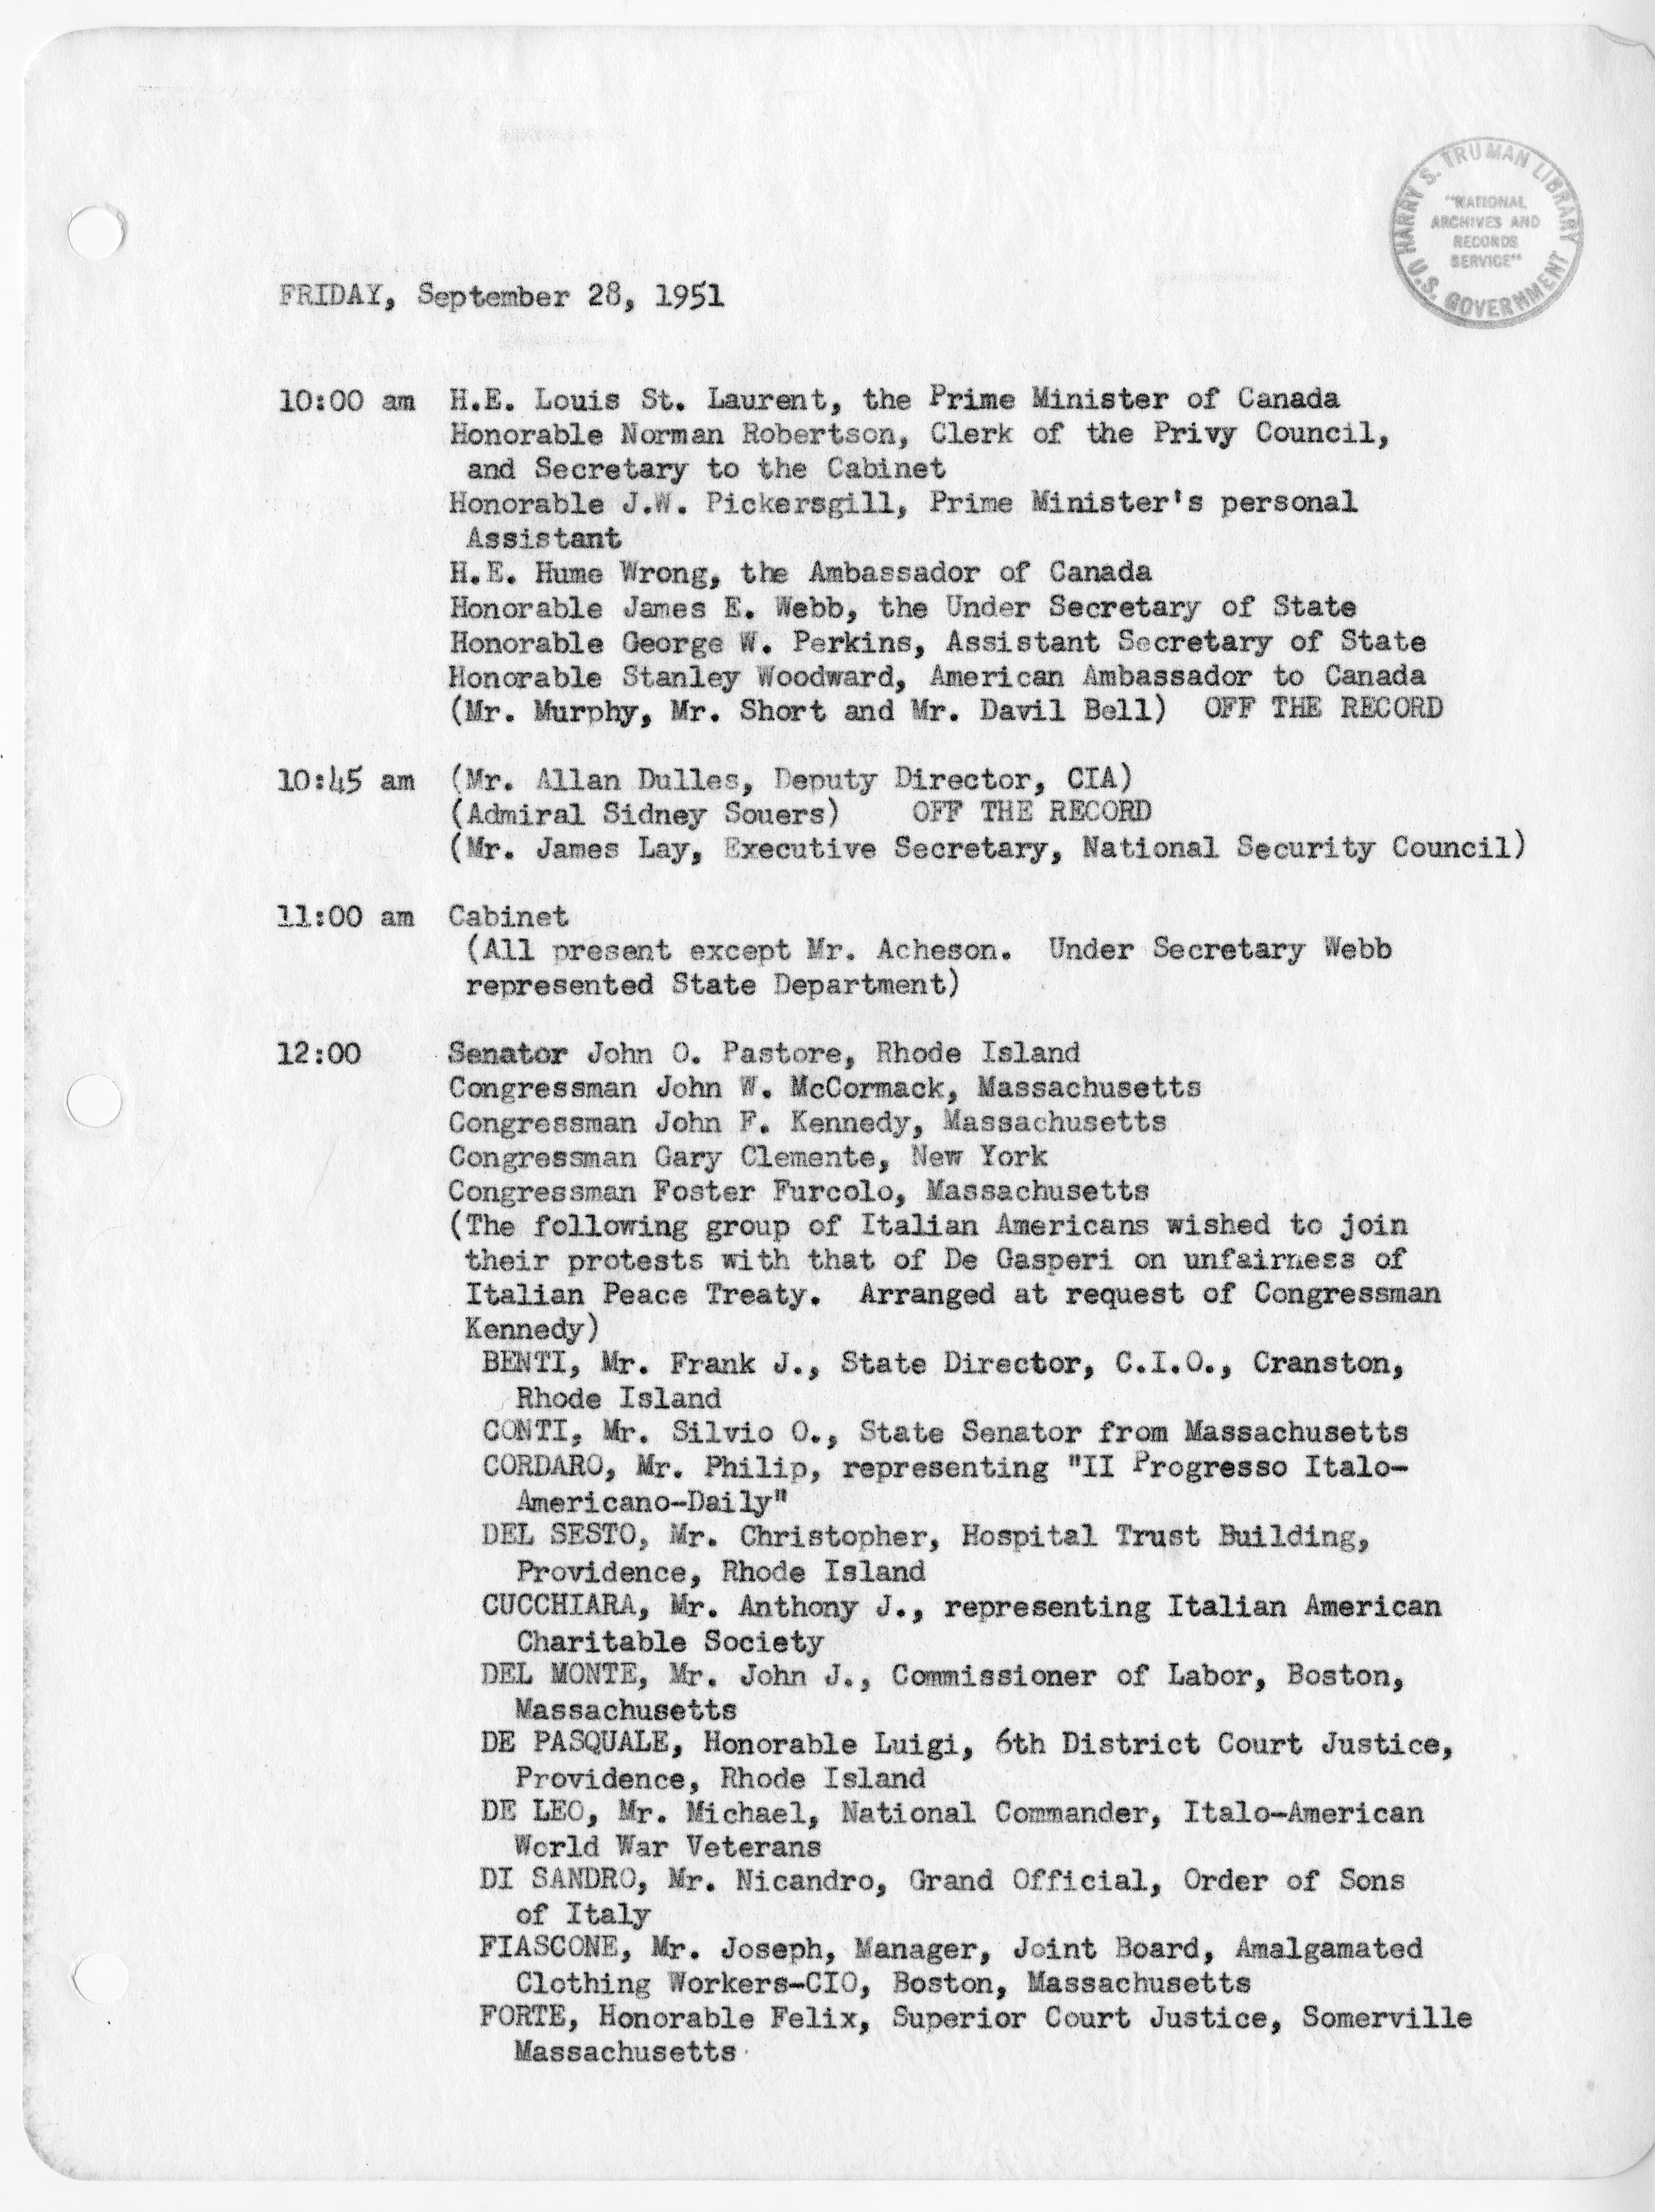 File:Daily Appointment Sheet for President Harry S. Truman - DPLA